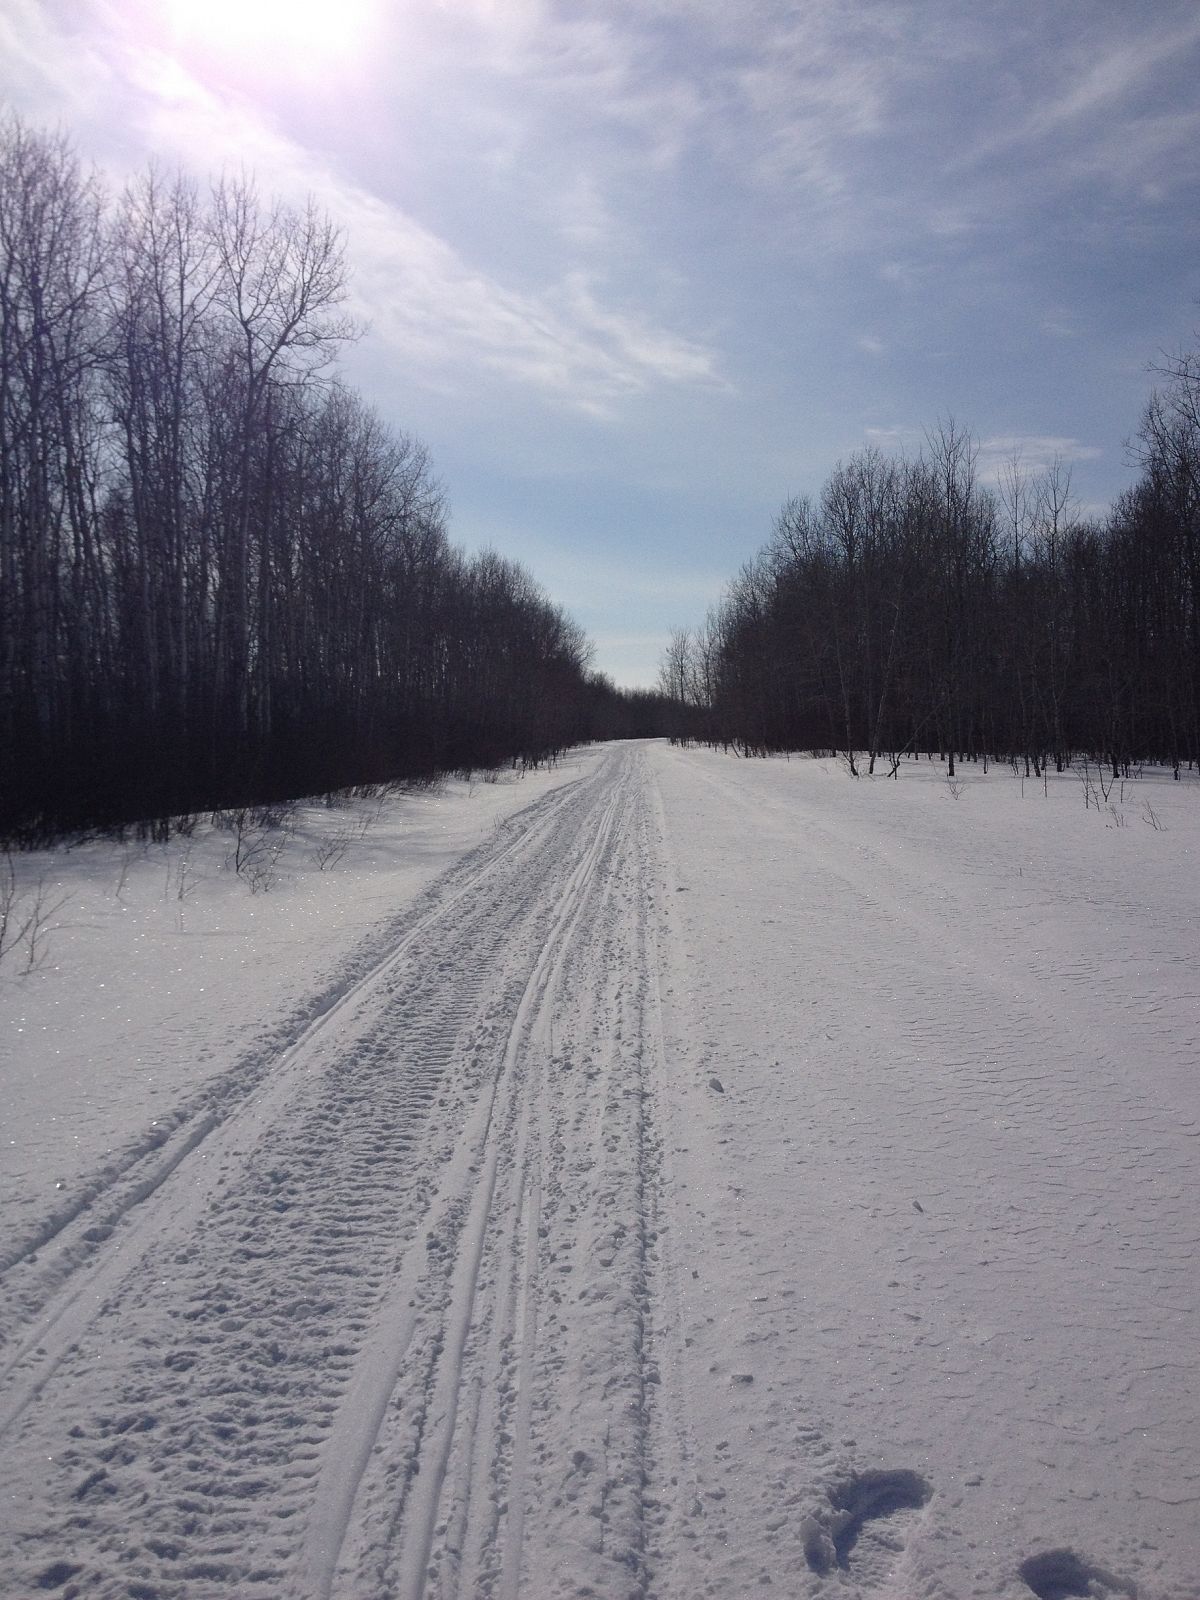 Gorgeous wide open well groomed trail.  Every snowmobilers delight!!!